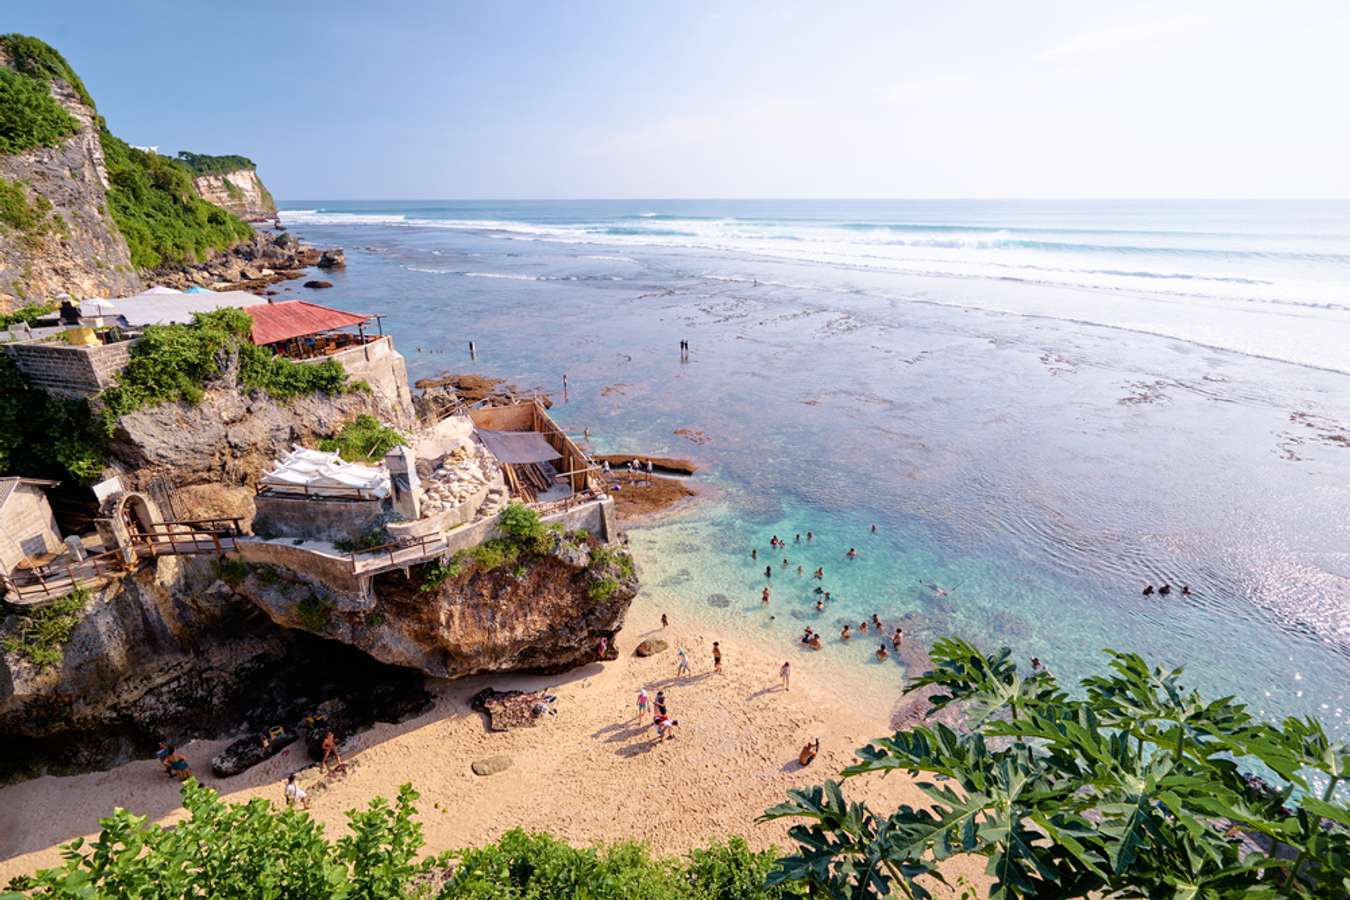 Best Beginner surf spots in Bali. Where to learn to surf in Bali with Swell  Bingin